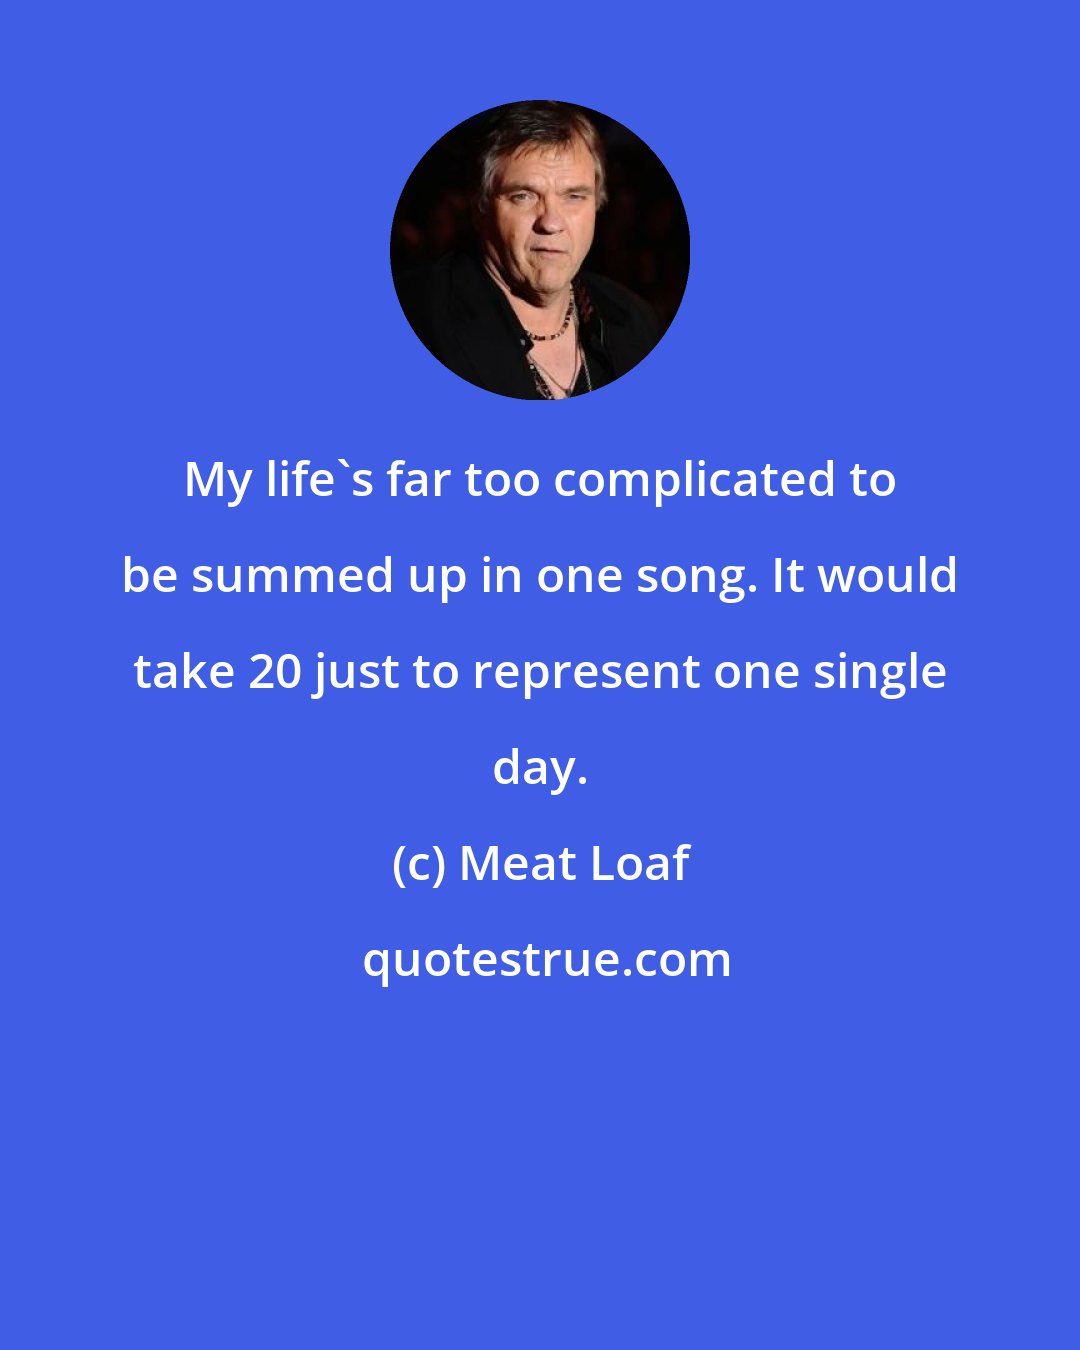 Meat Loaf: My life's far too complicated to be summed up in one song. It would take 20 just to represent one single day.